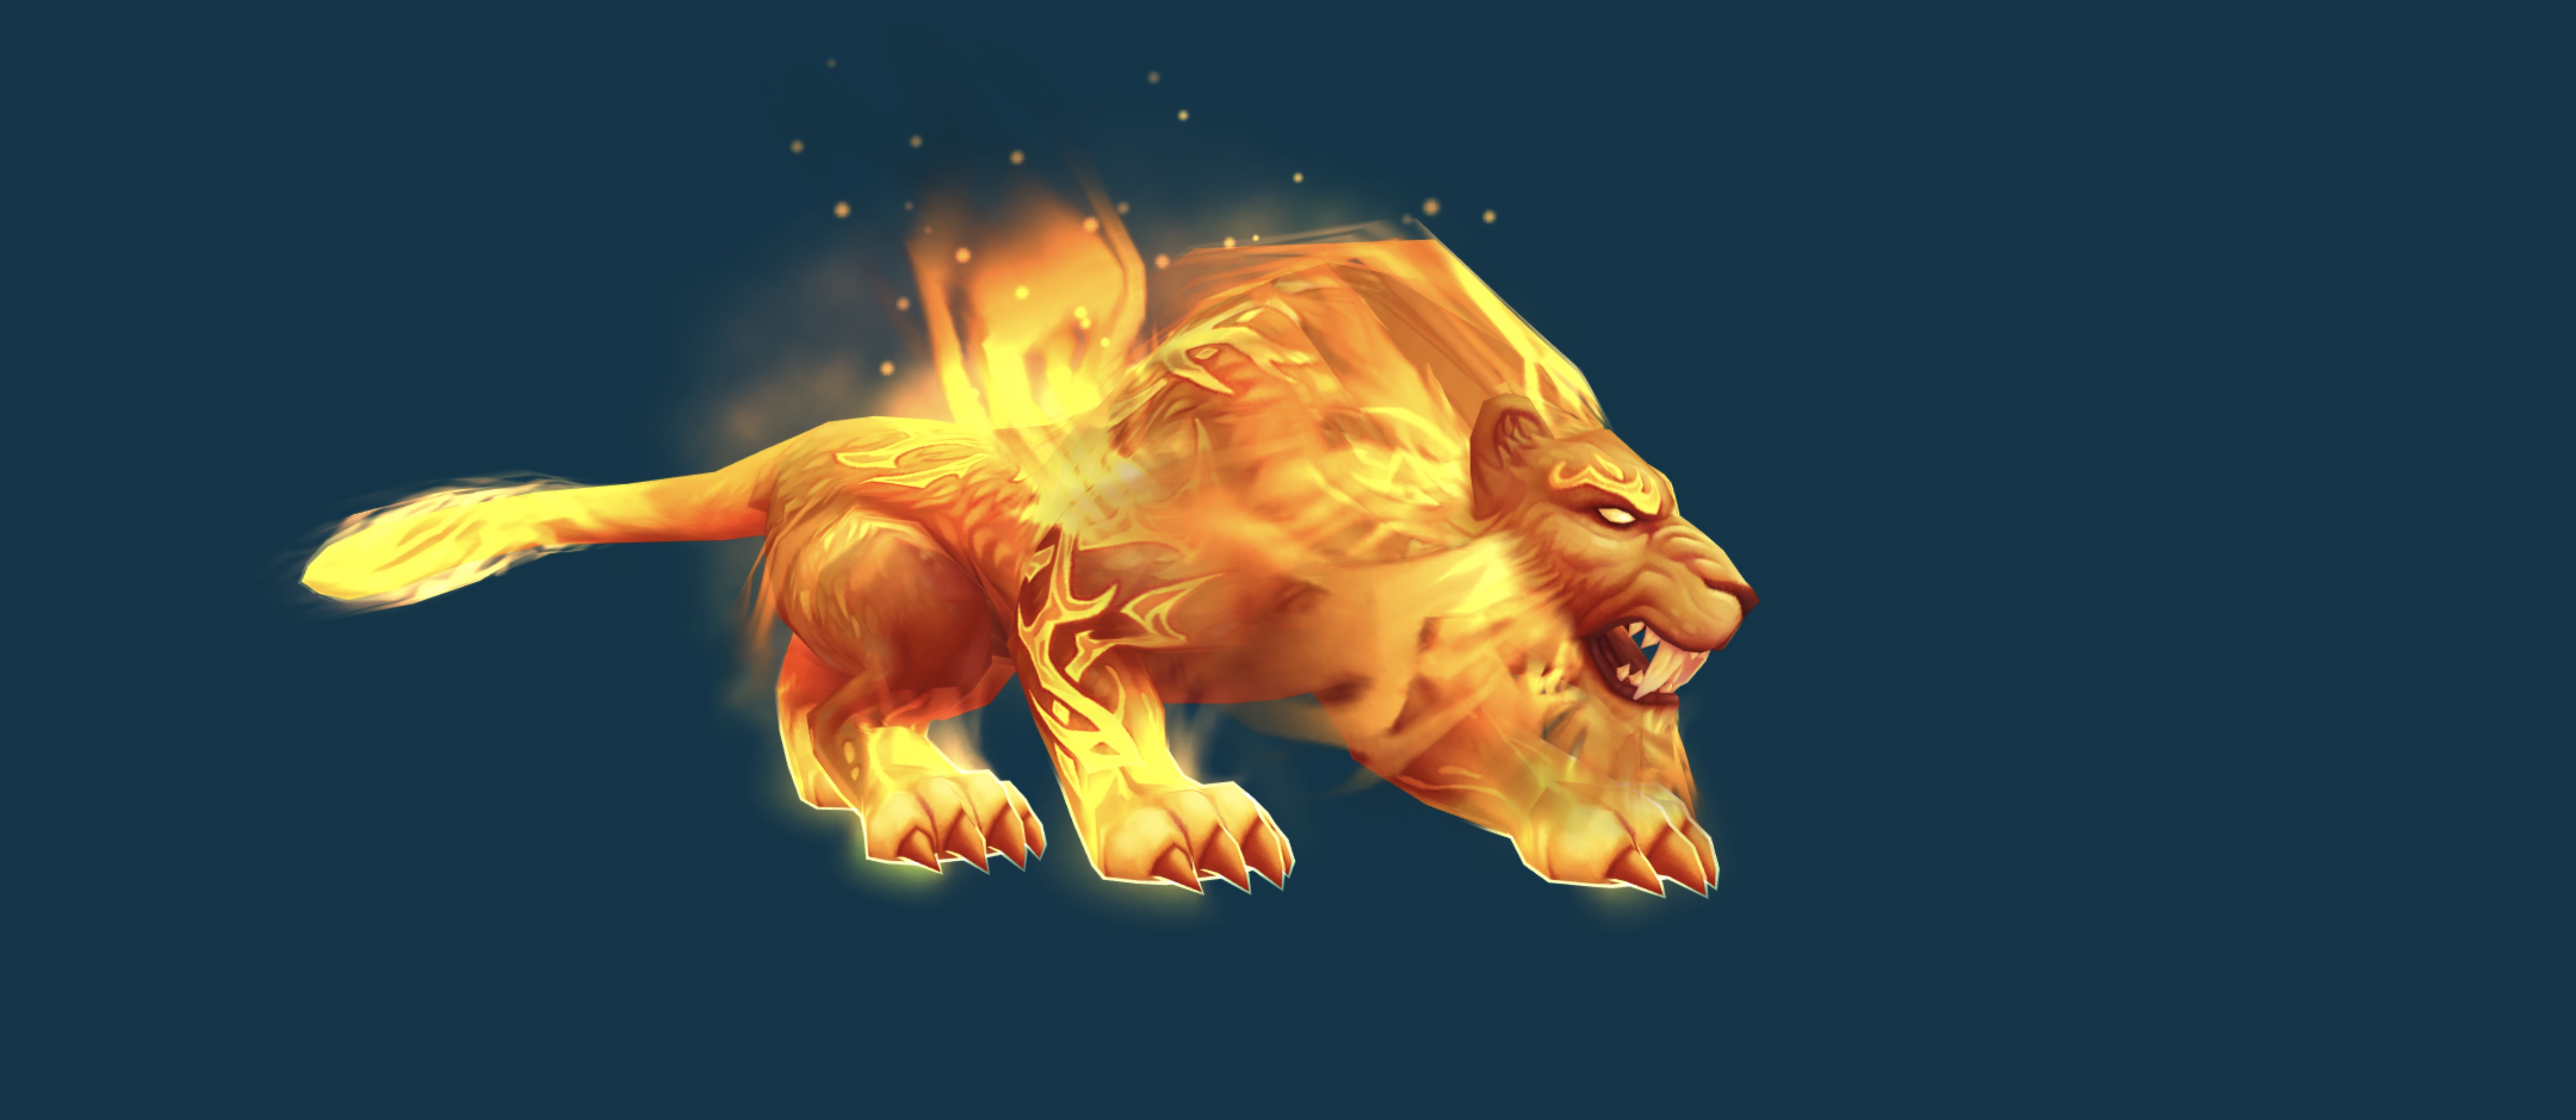 HD Fire Cat Druid Customization Option in Patch 10.2 - News - Icy Veins